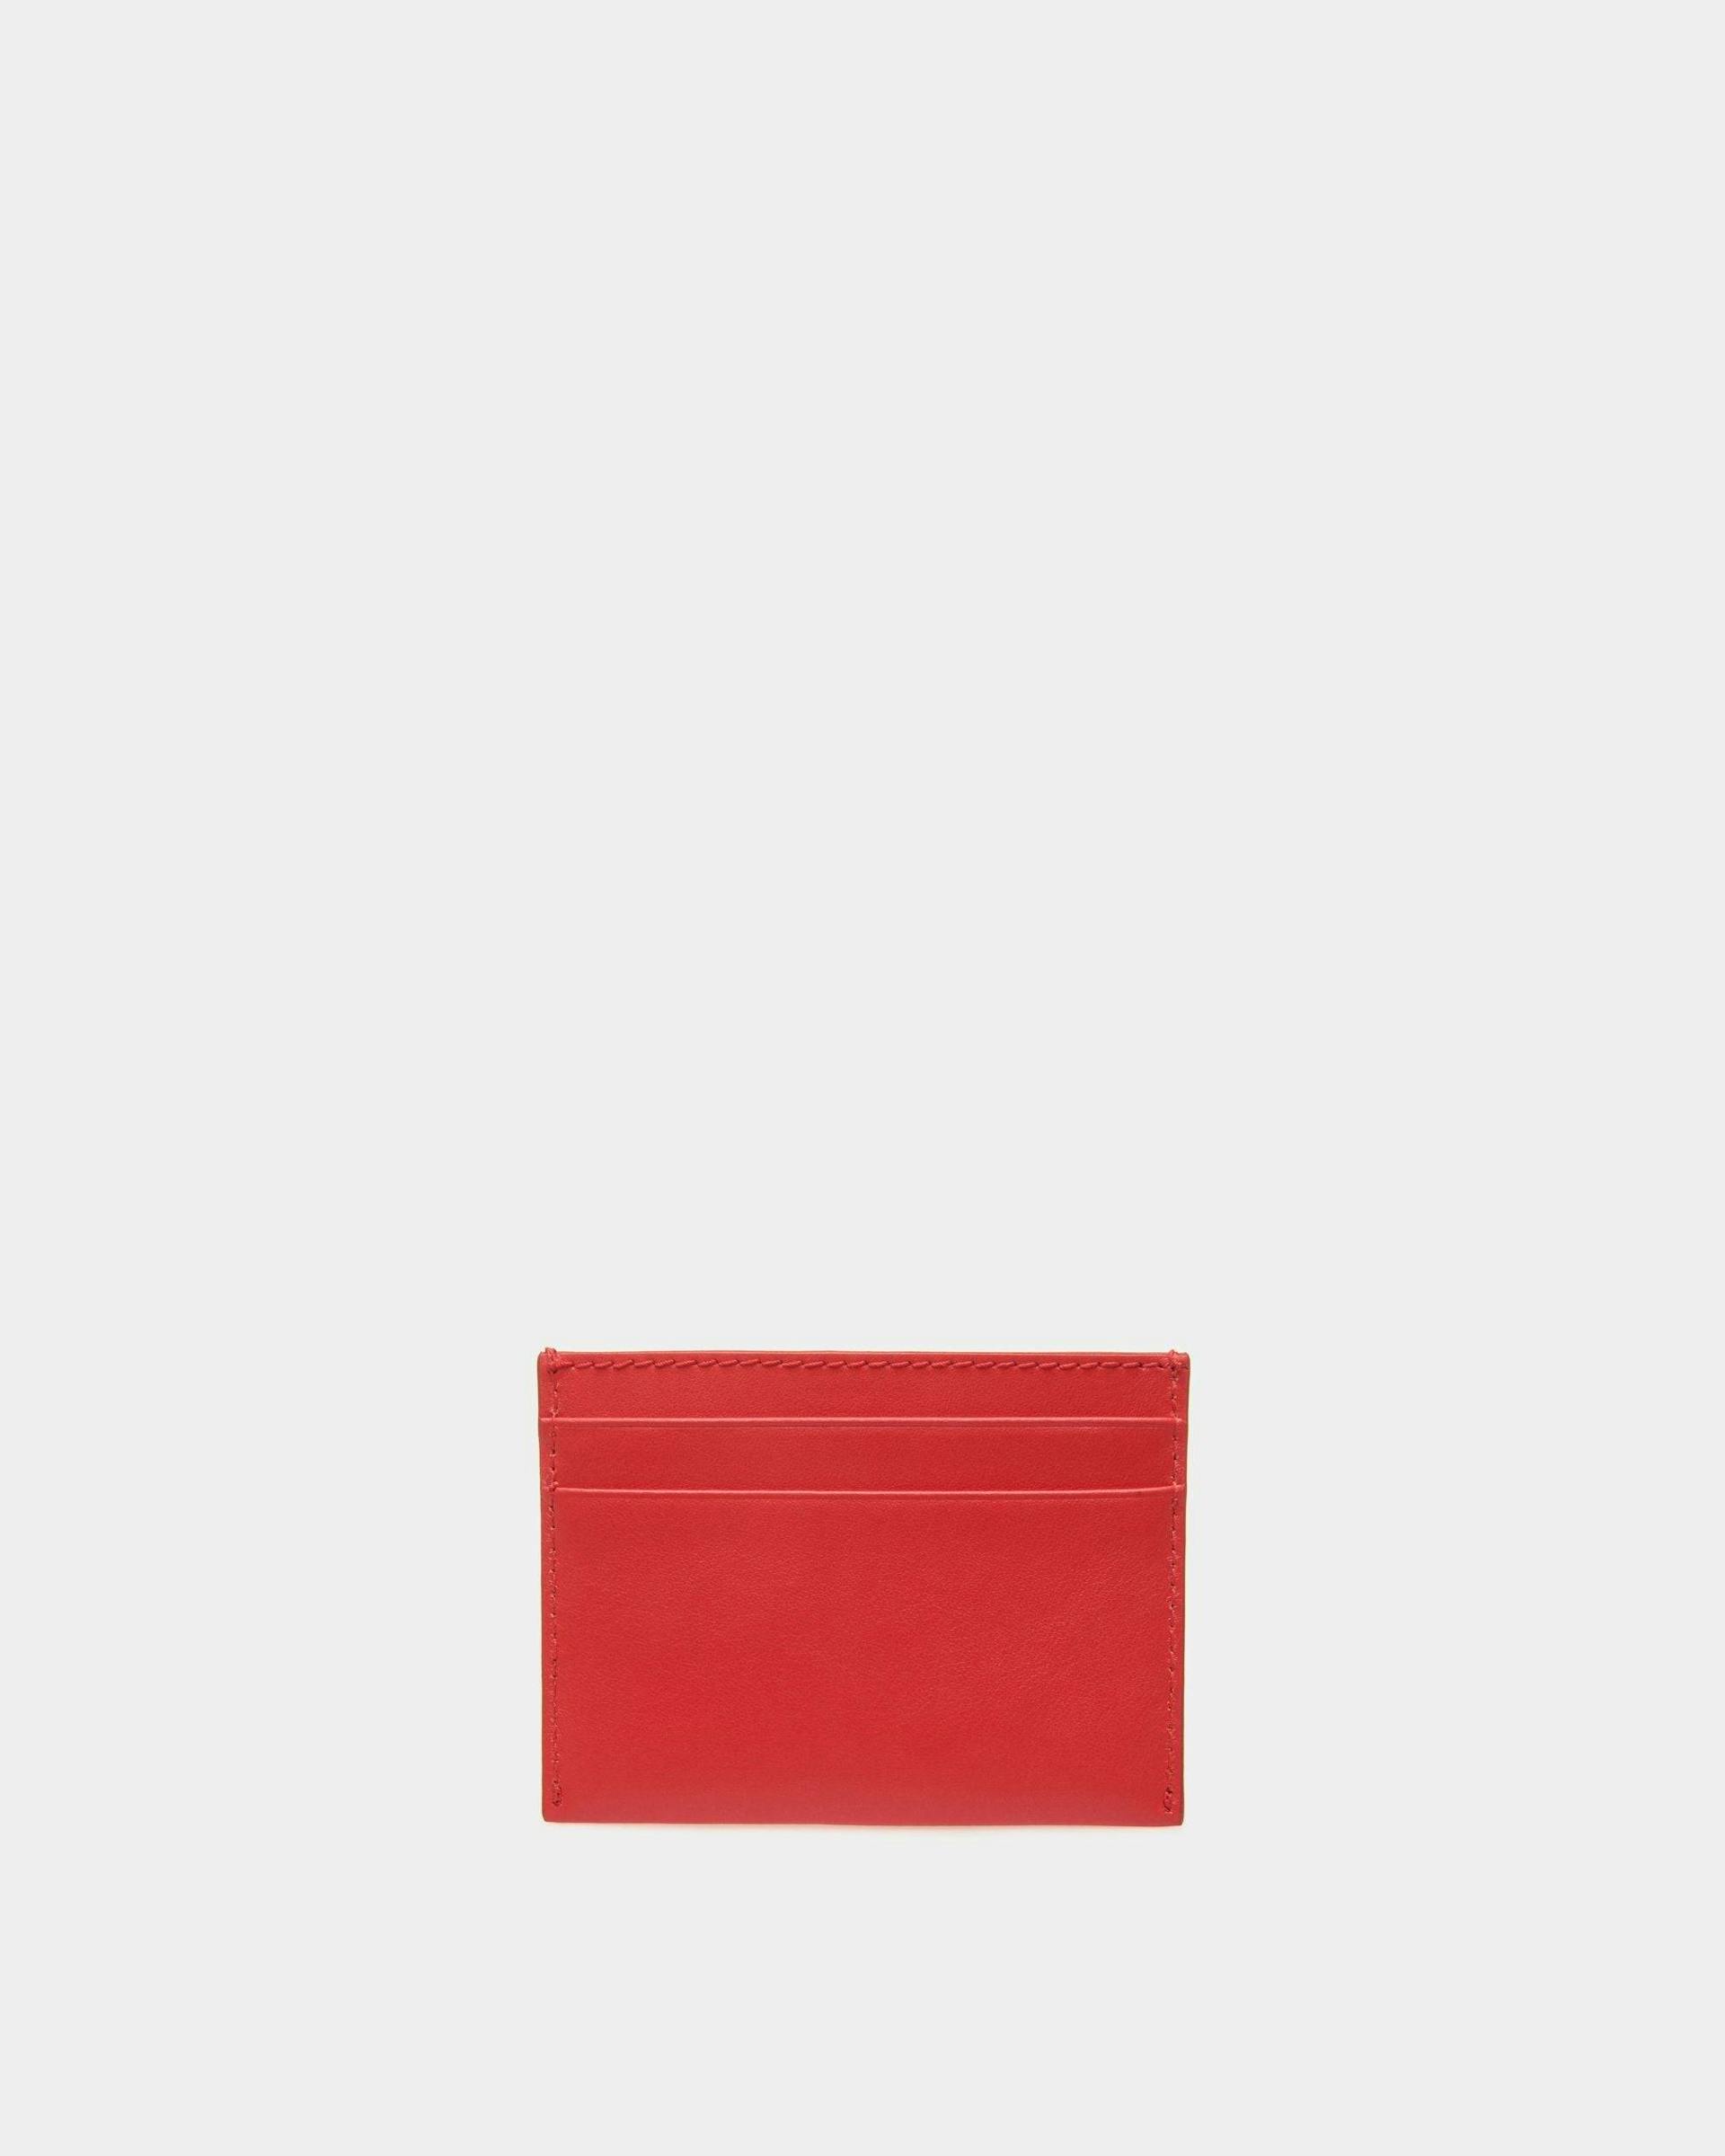 Women's Emblem Card Holder in Red Leather | Bally | Still Life Back